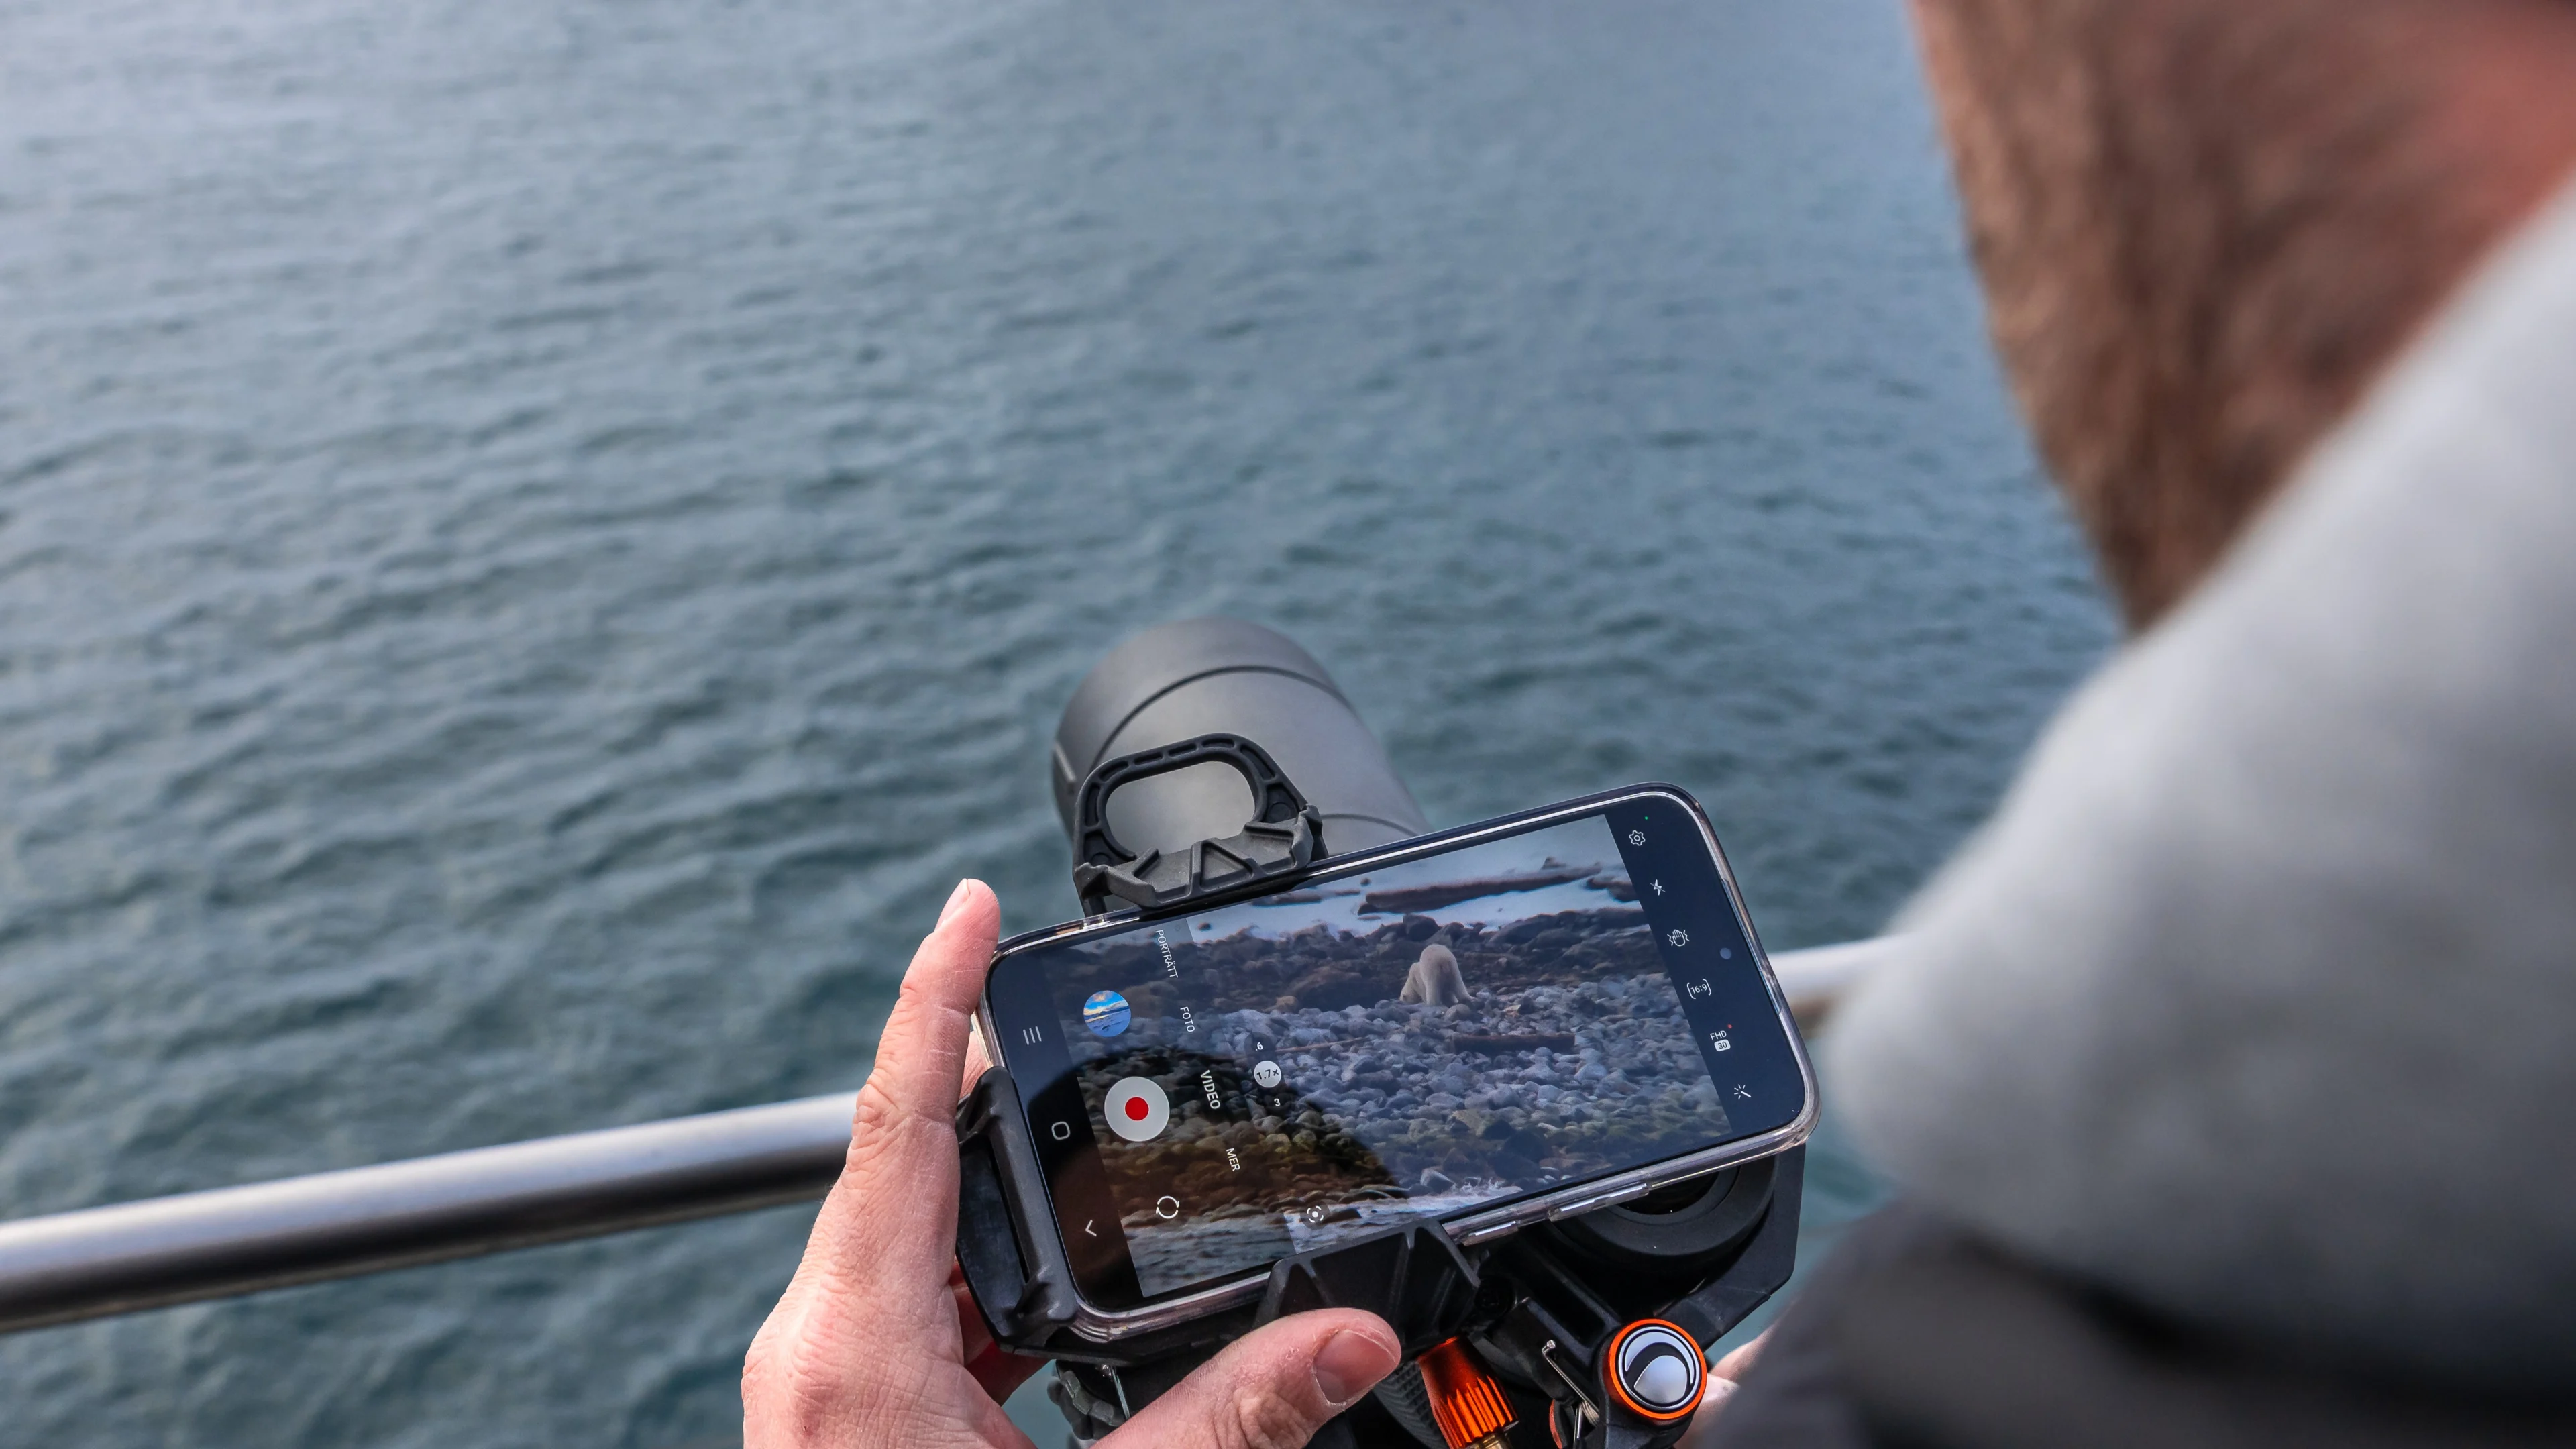 Photographing from on deck in Raudfjord, Svalbard. Photo: Jan Hvizdal